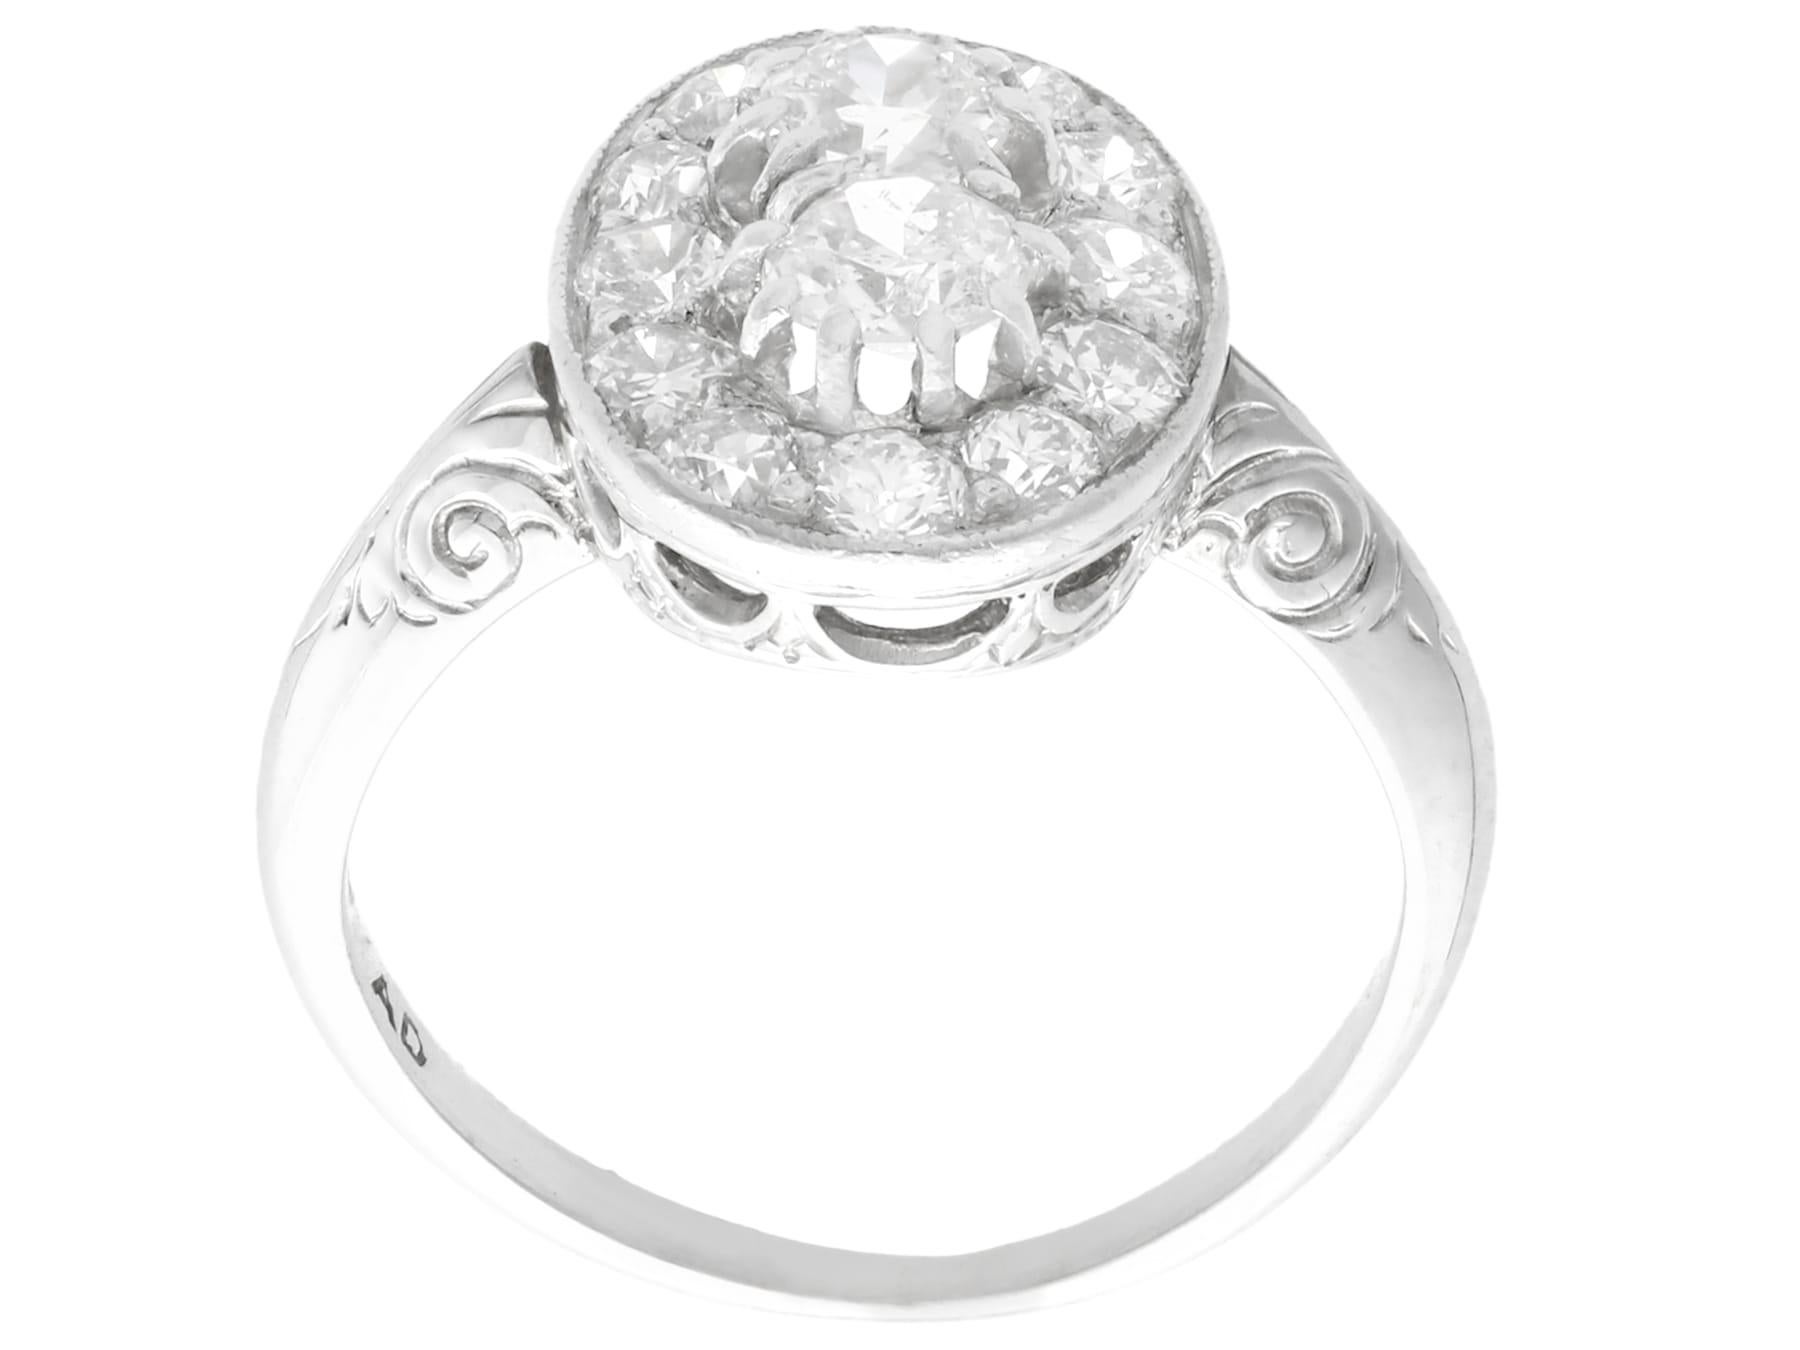 1940s 1.26 Carat Diamond and White Gold Platinum Set Cocktail Ring In Excellent Condition For Sale In Jesmond, Newcastle Upon Tyne